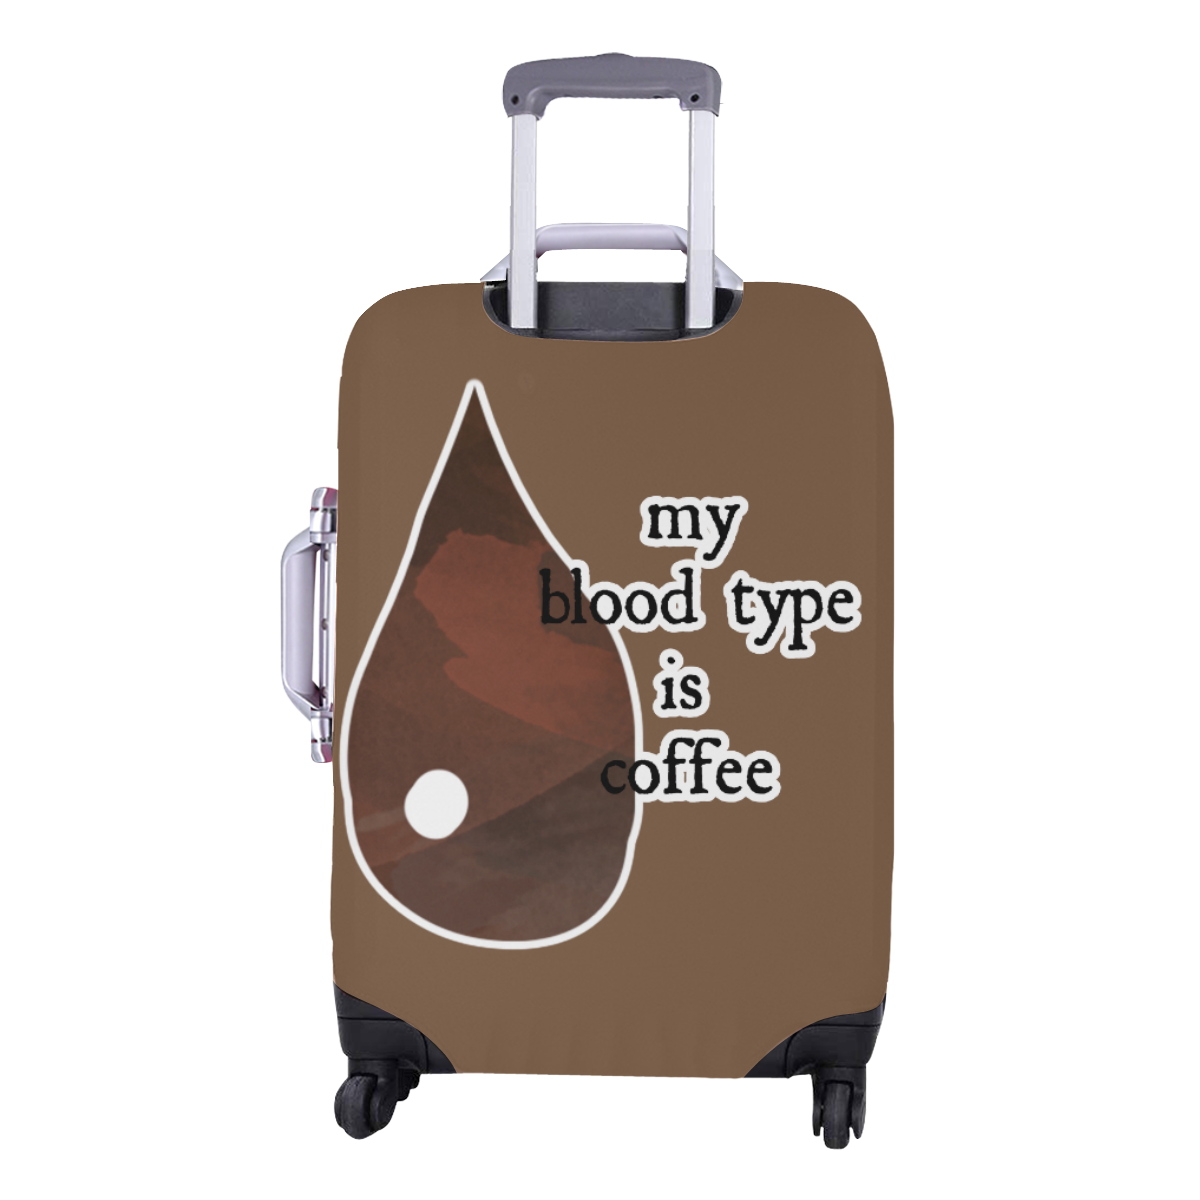 My blood type is coffee! Luggage Cover/Medium 22"-25"